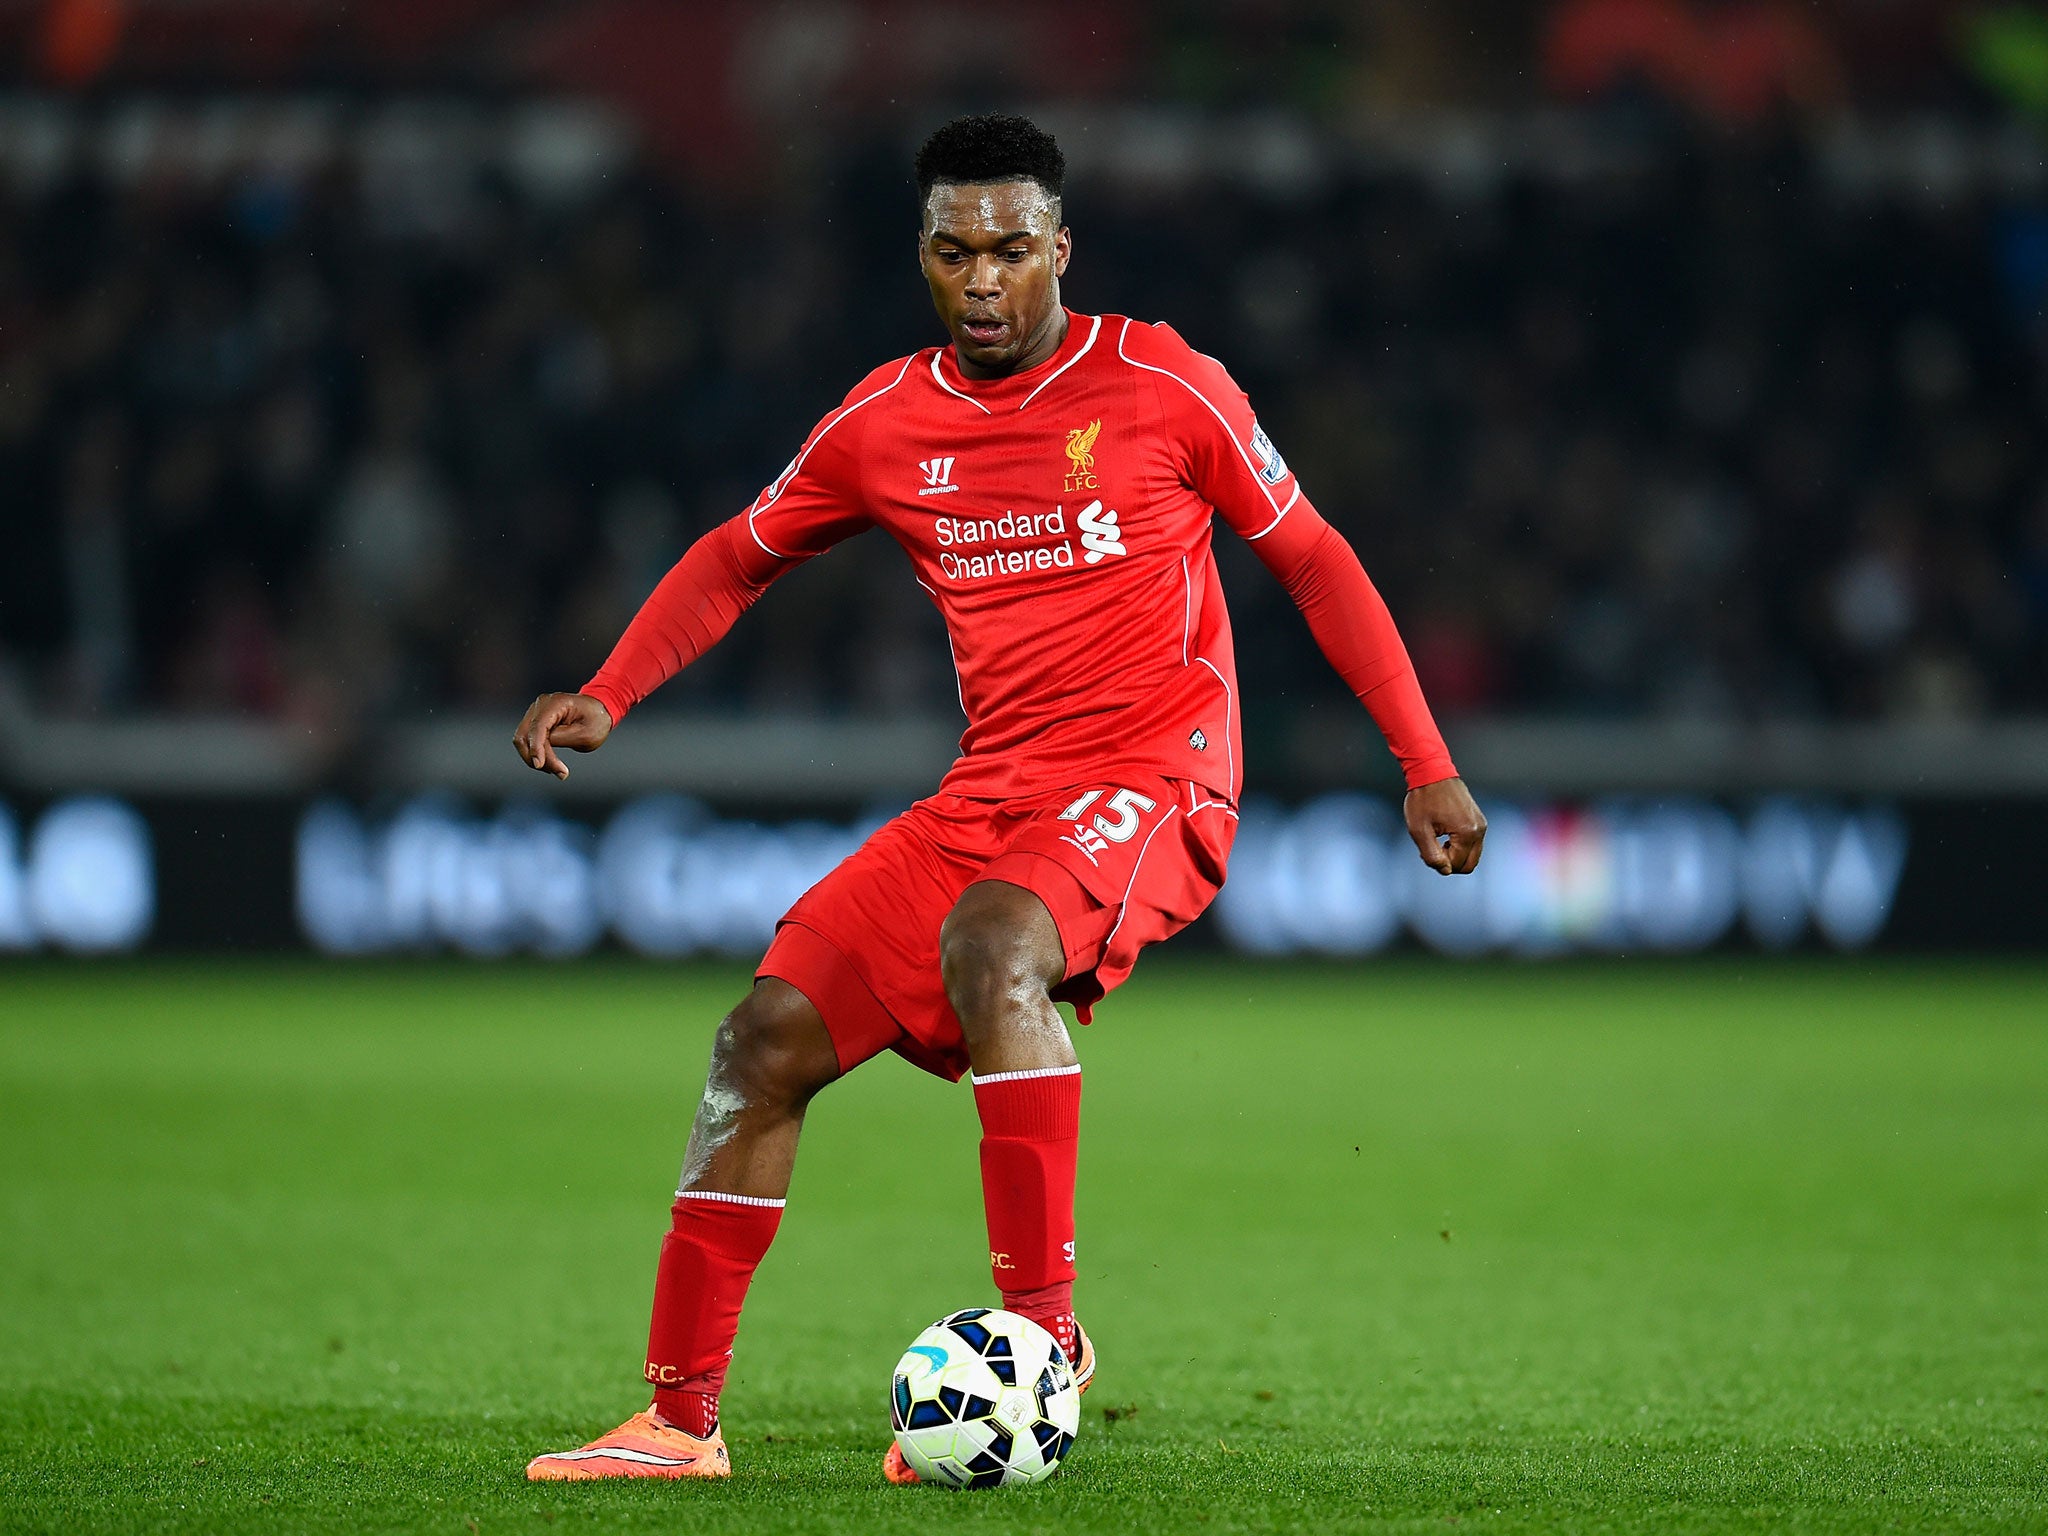 Daniel Sturridge has only scored three times in 12 games since his comeback from injury